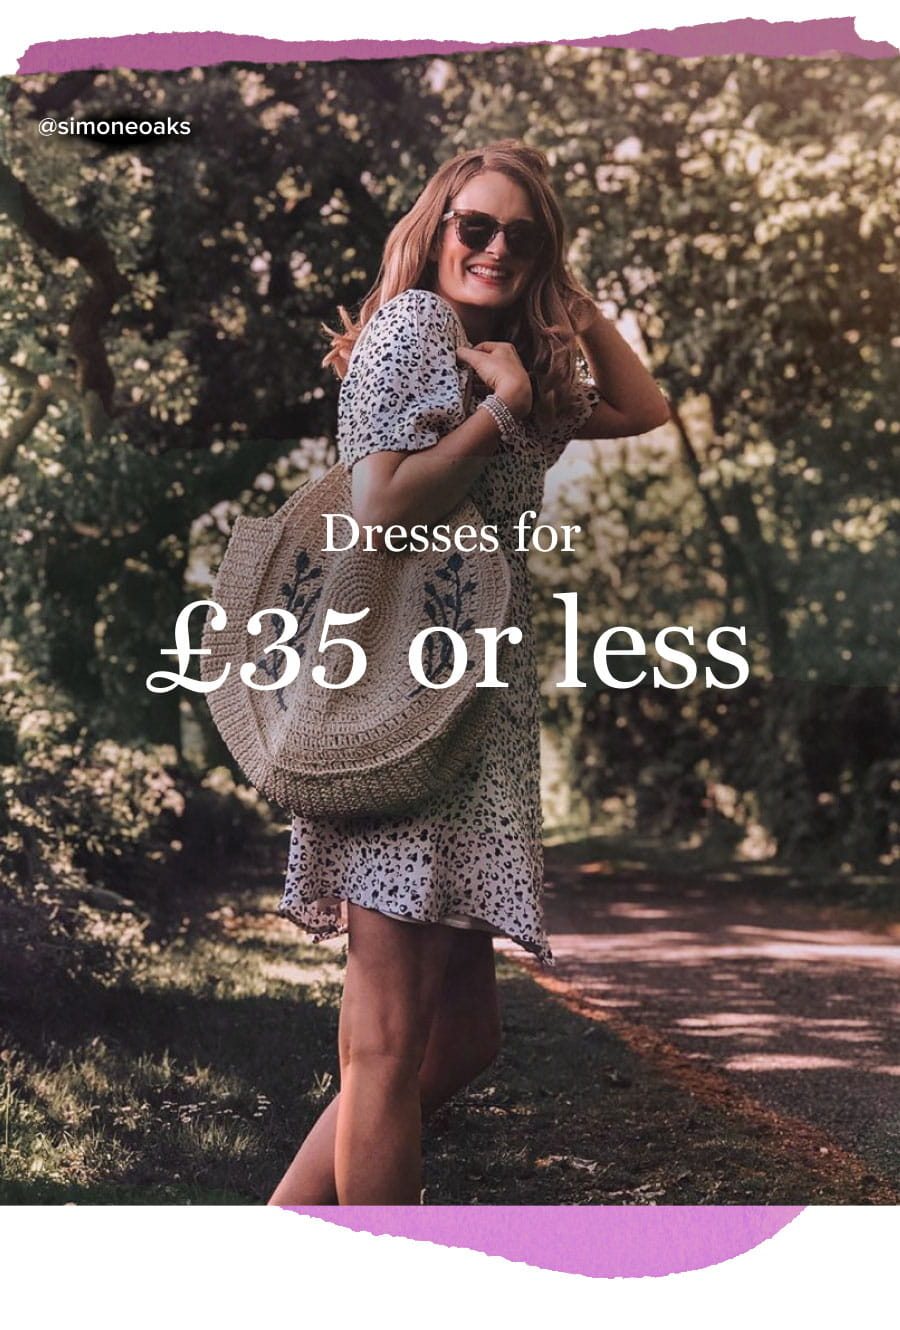 Dresses for £35 or less